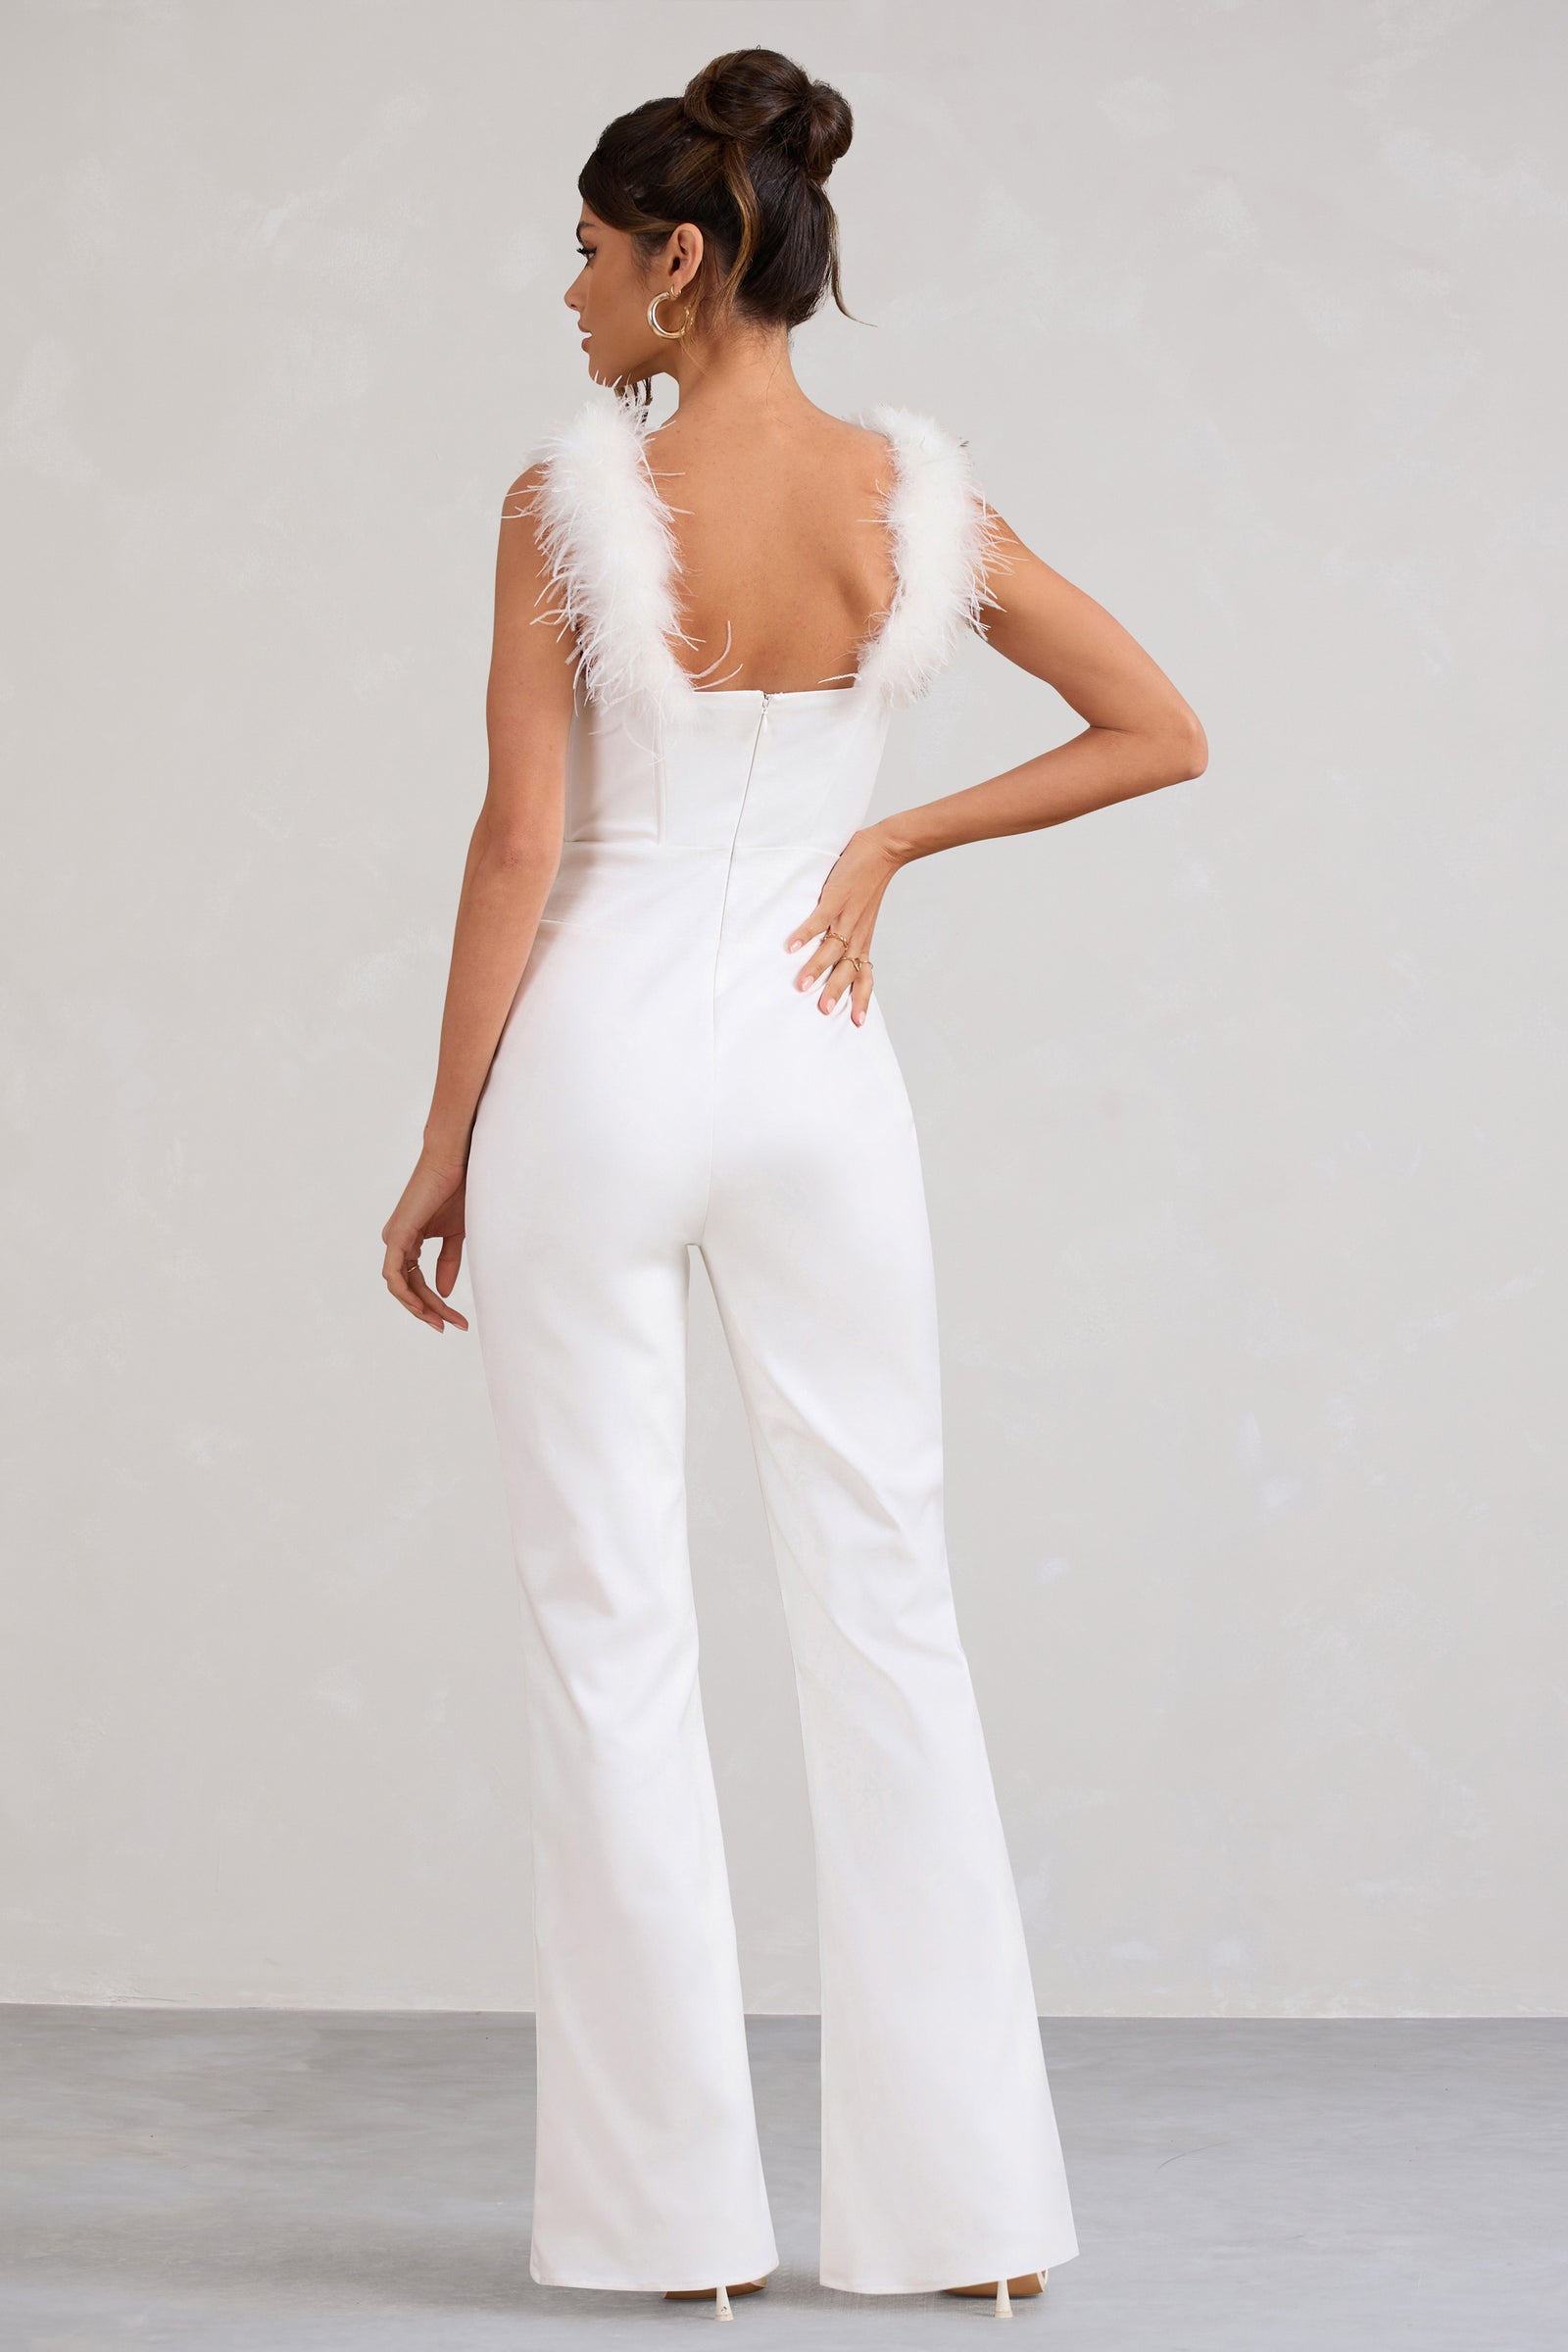 Maddie White Backless Halter Neck Ruched Jumpsuit – Club L London